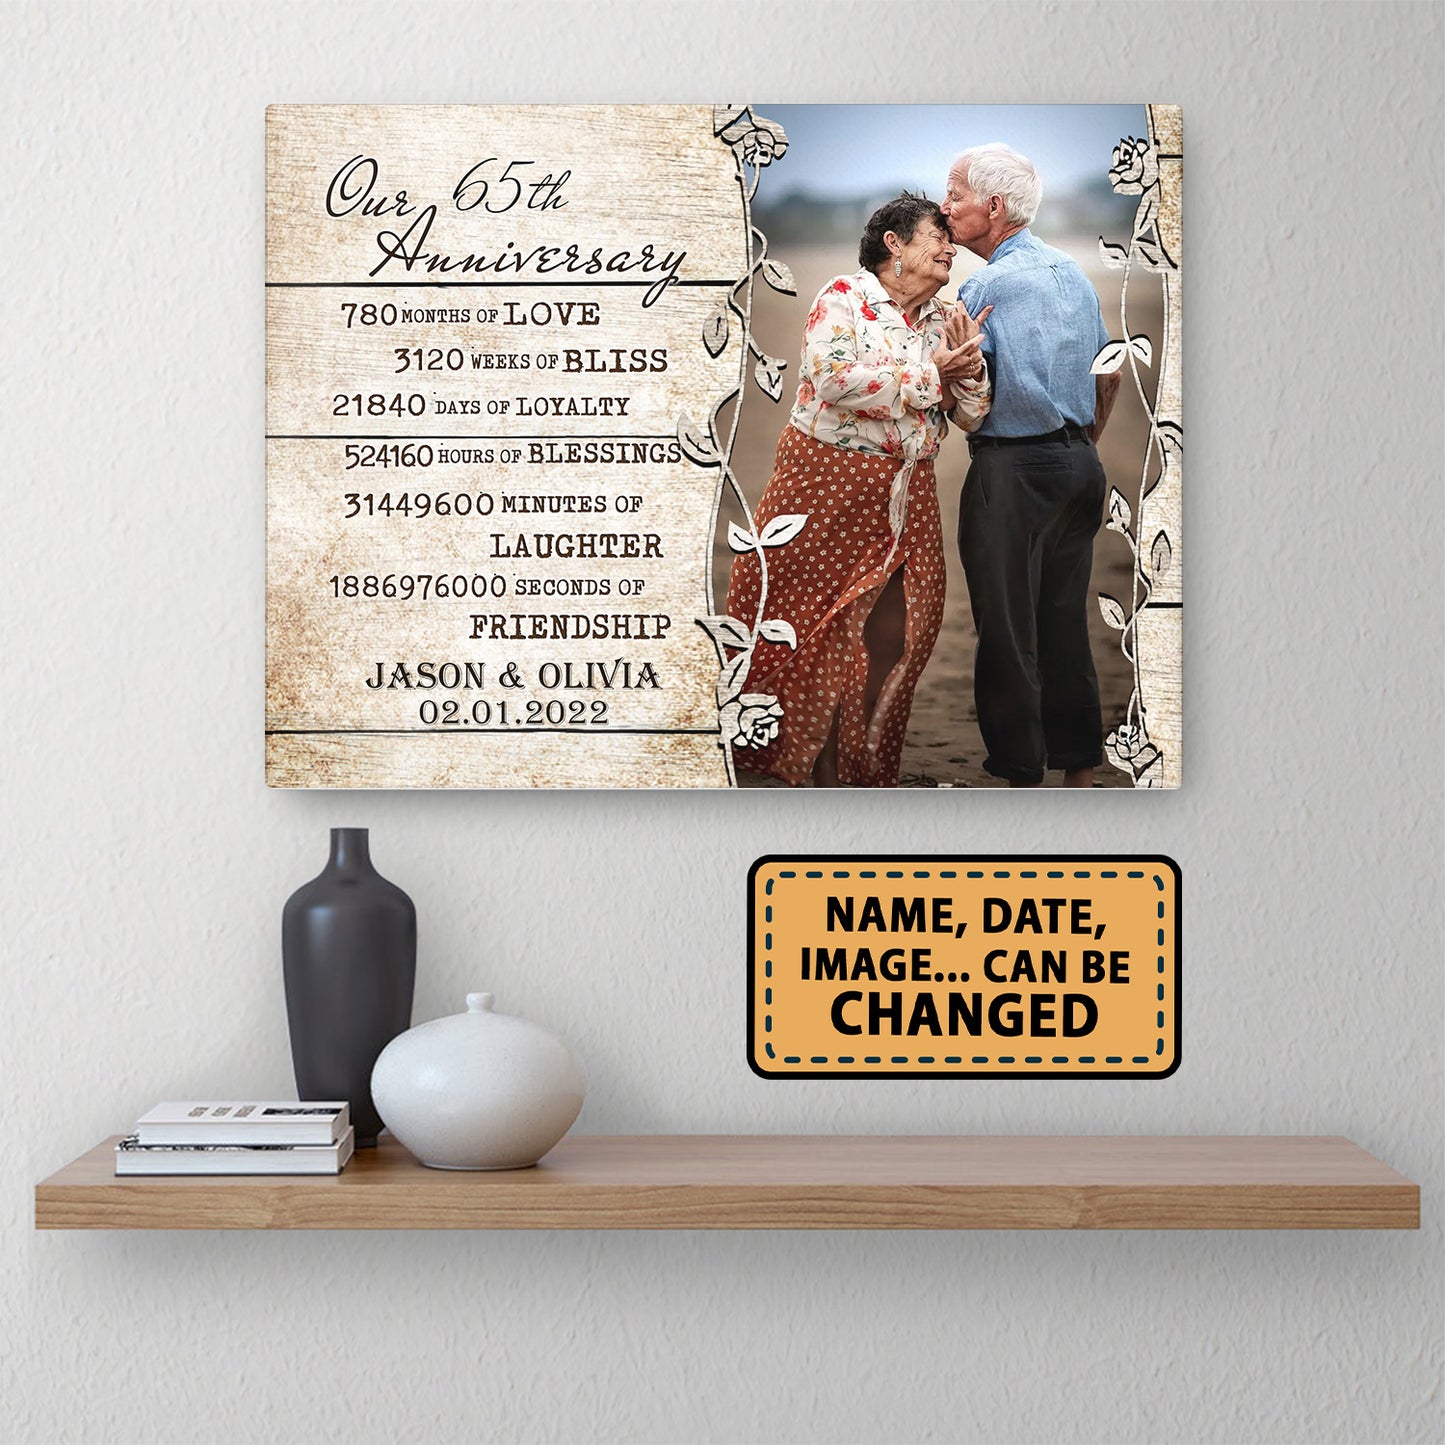 Our 65th Anniversary Timeless love Valentine Gift Personalized Canvas